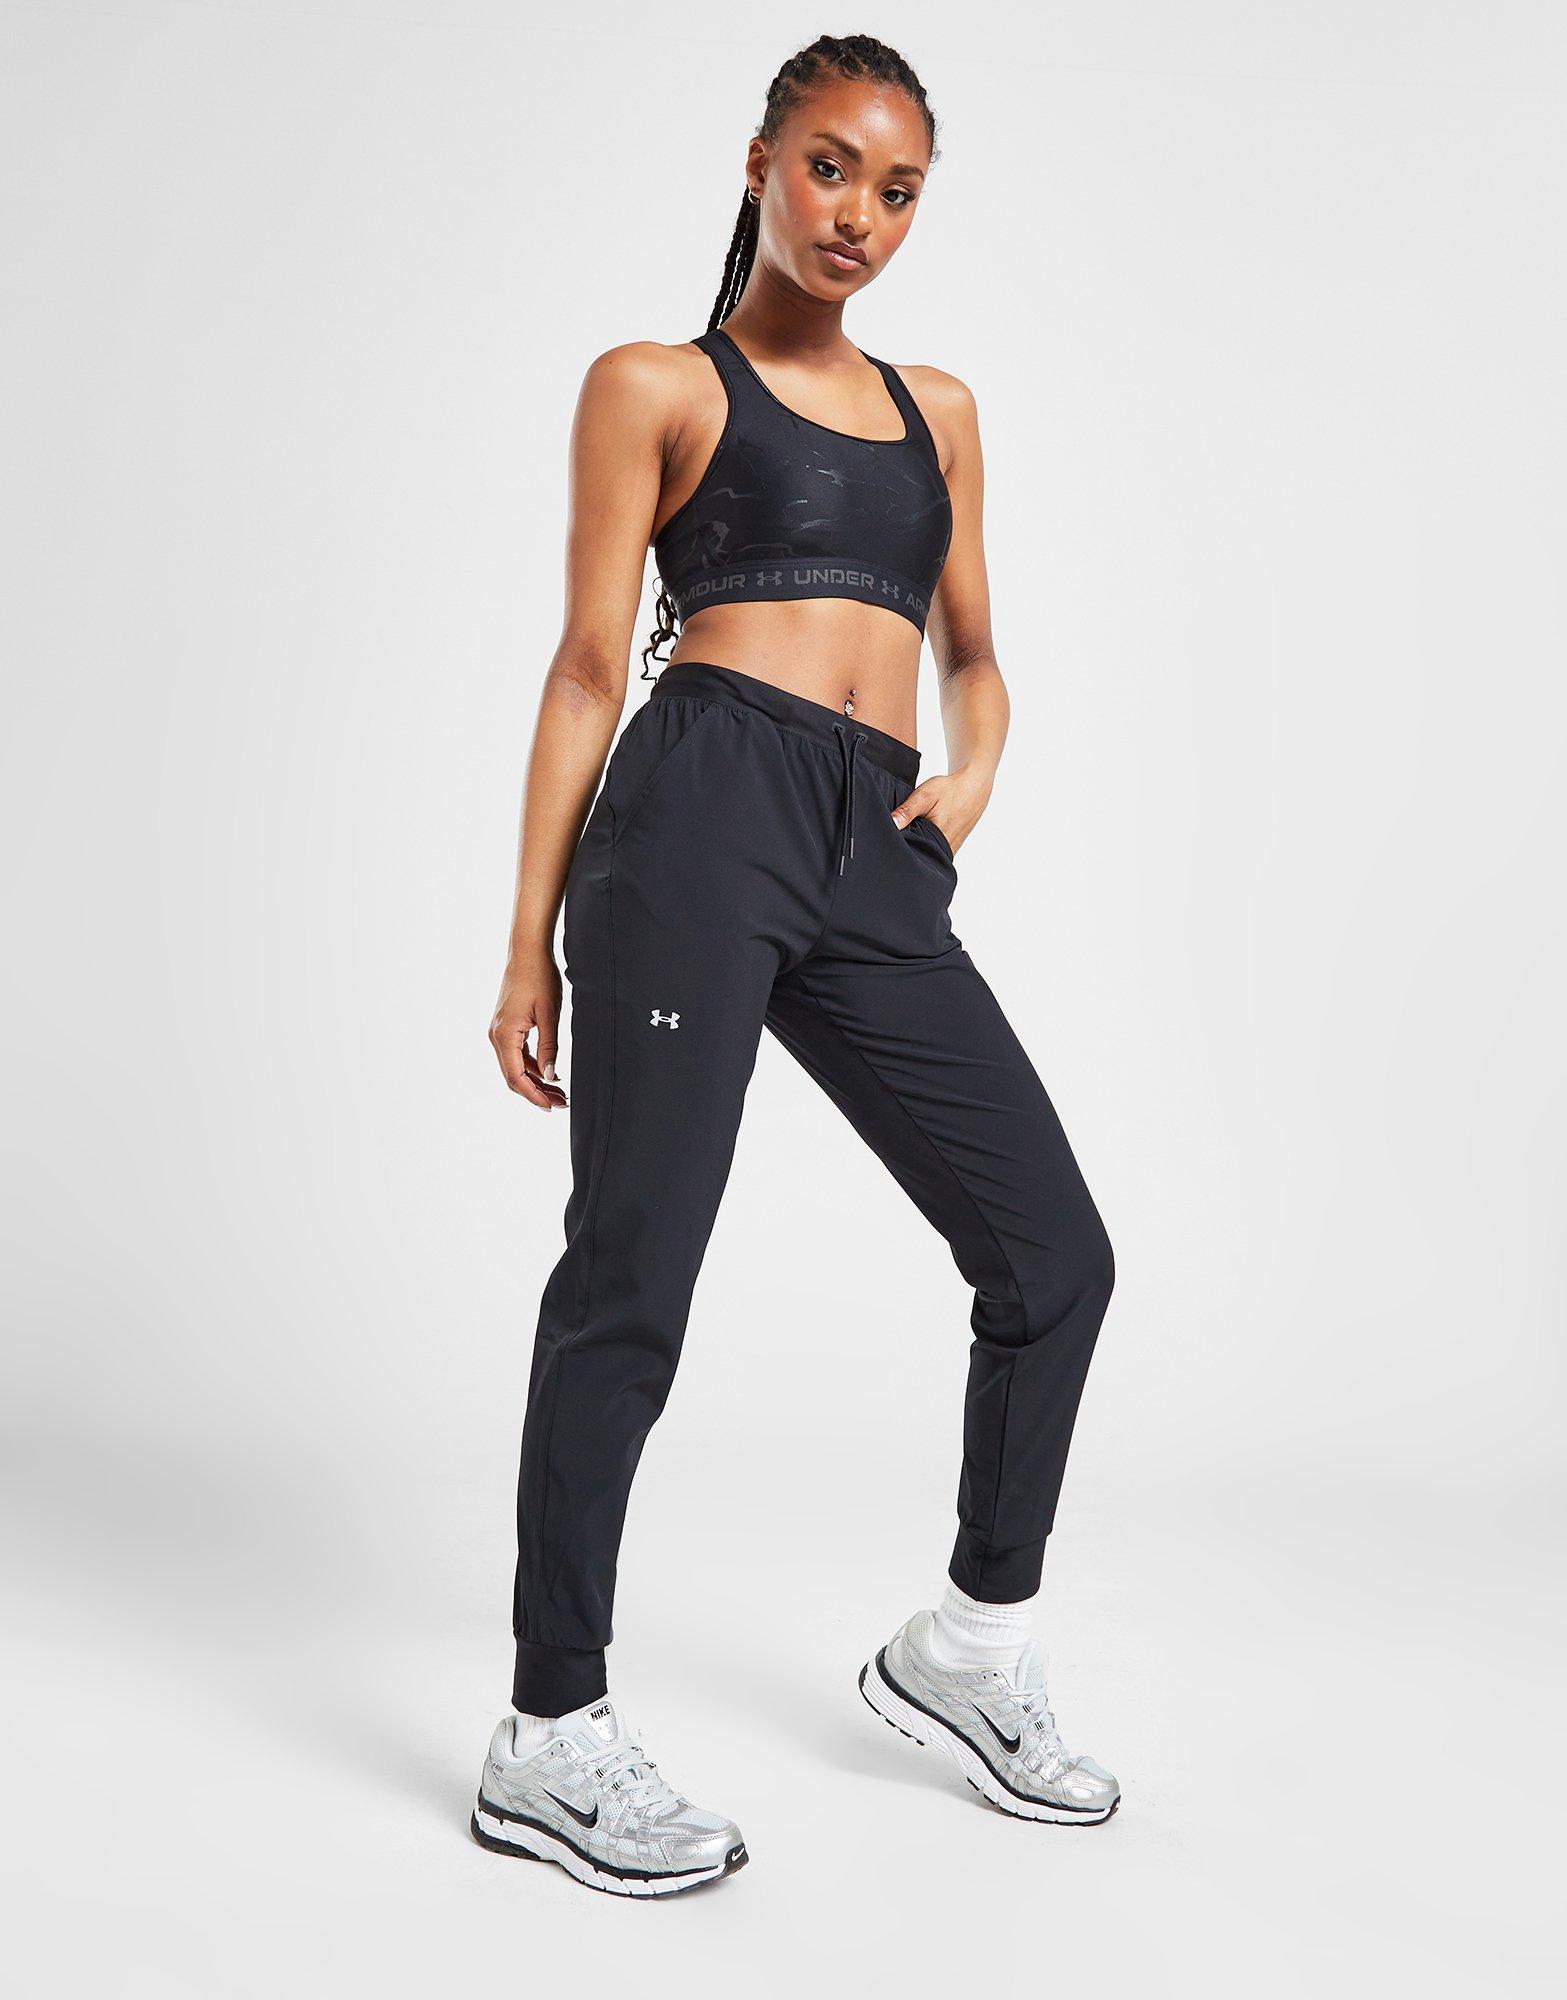 Women's Armour Sport Woven Pant from Under Armour